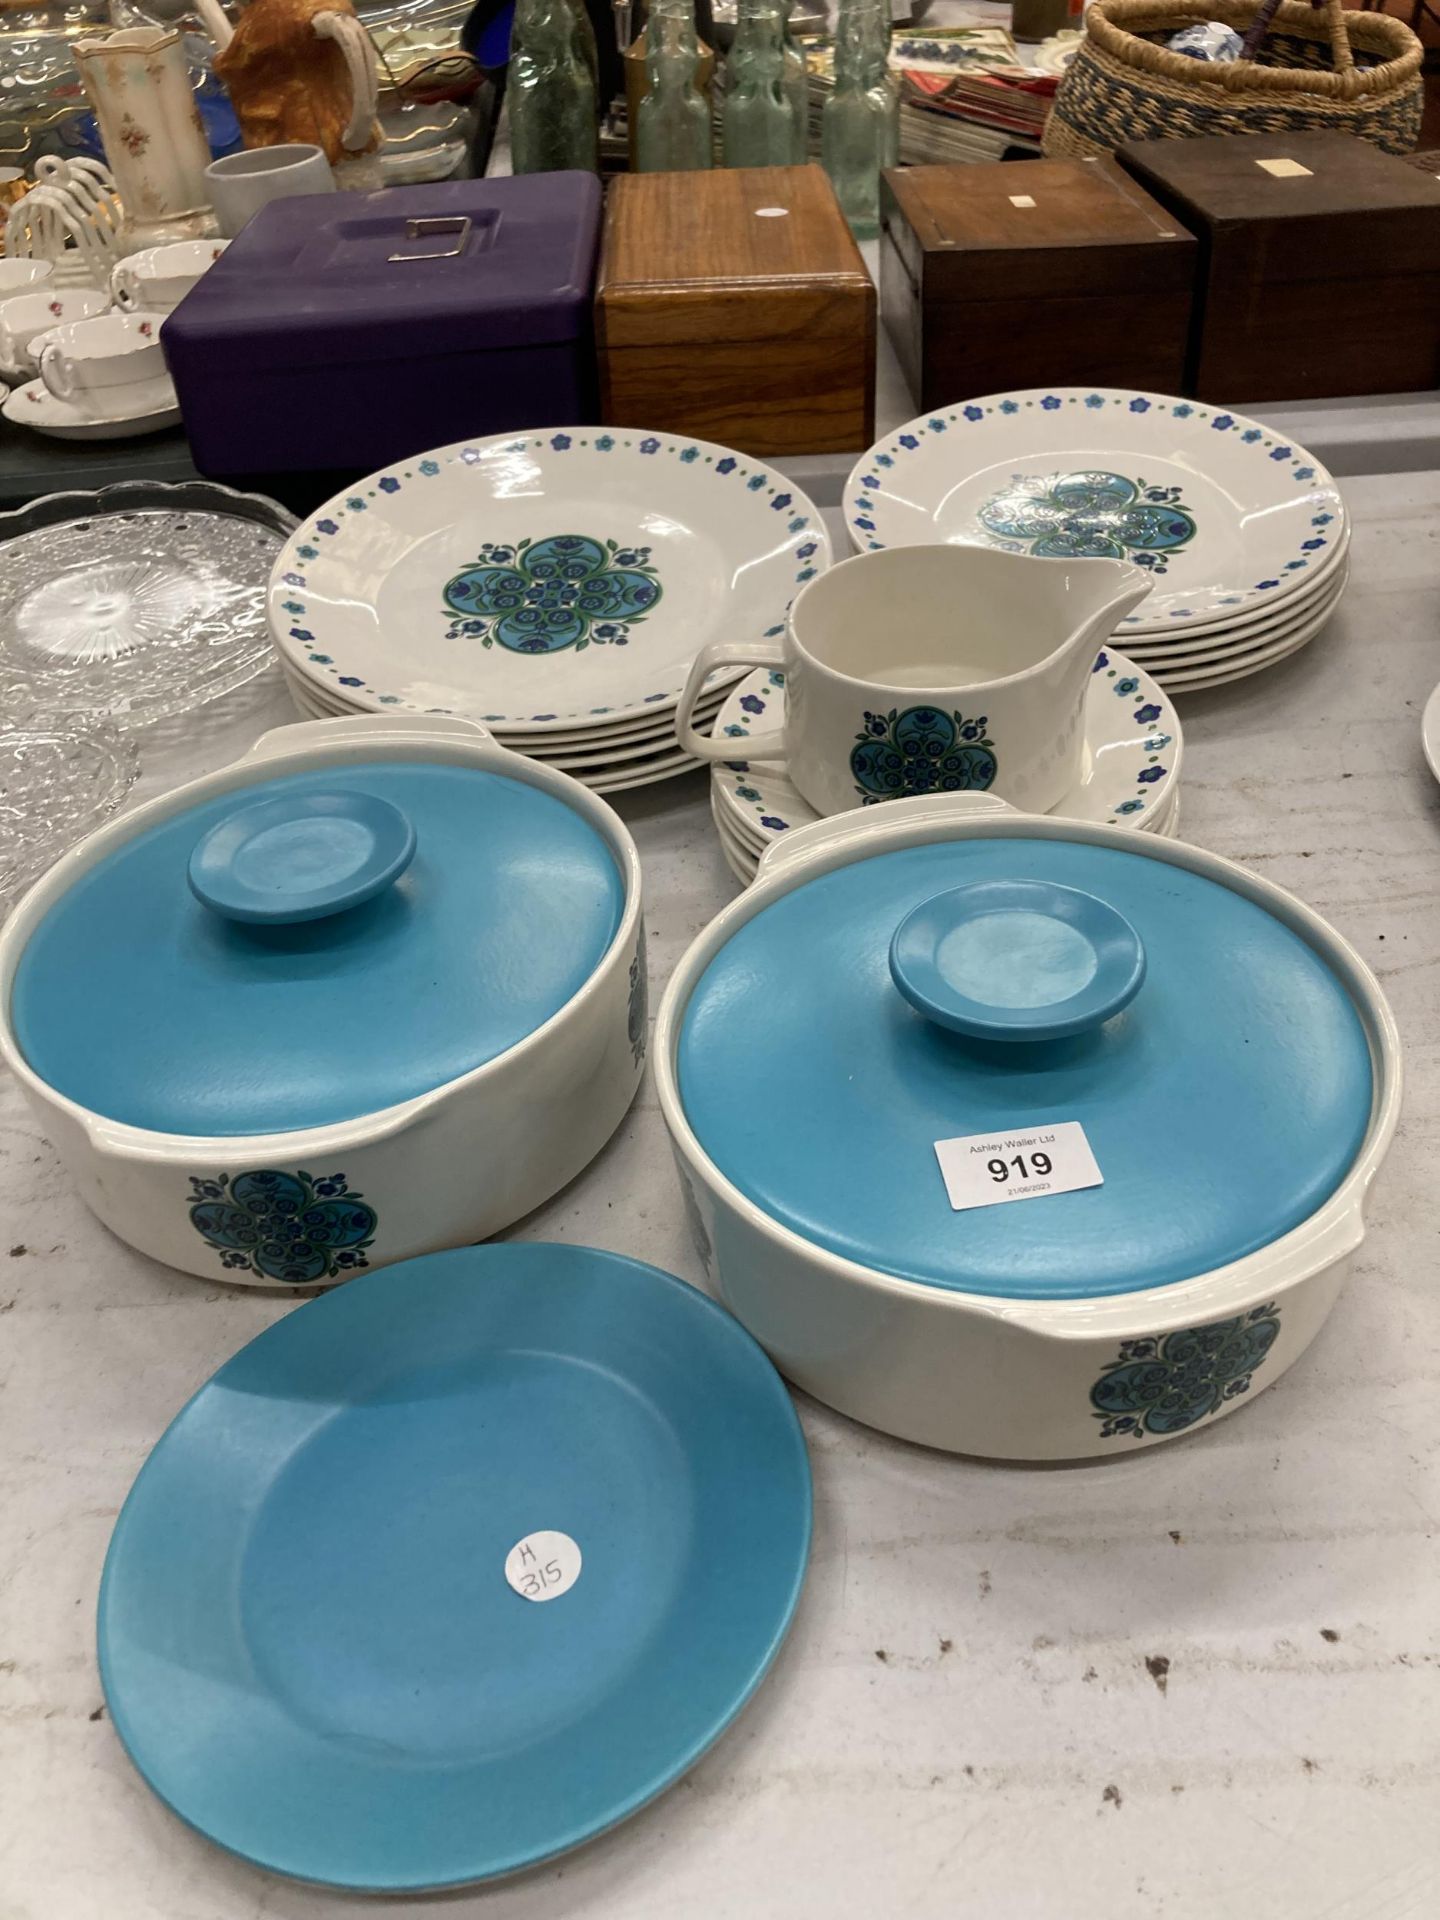 A QUANTITY OF J & G MEAKIN DINNERWARE TO INCLUDE PLATES, CASSEROLE/SERVING DISHES, SAUCE BOAT, ETC